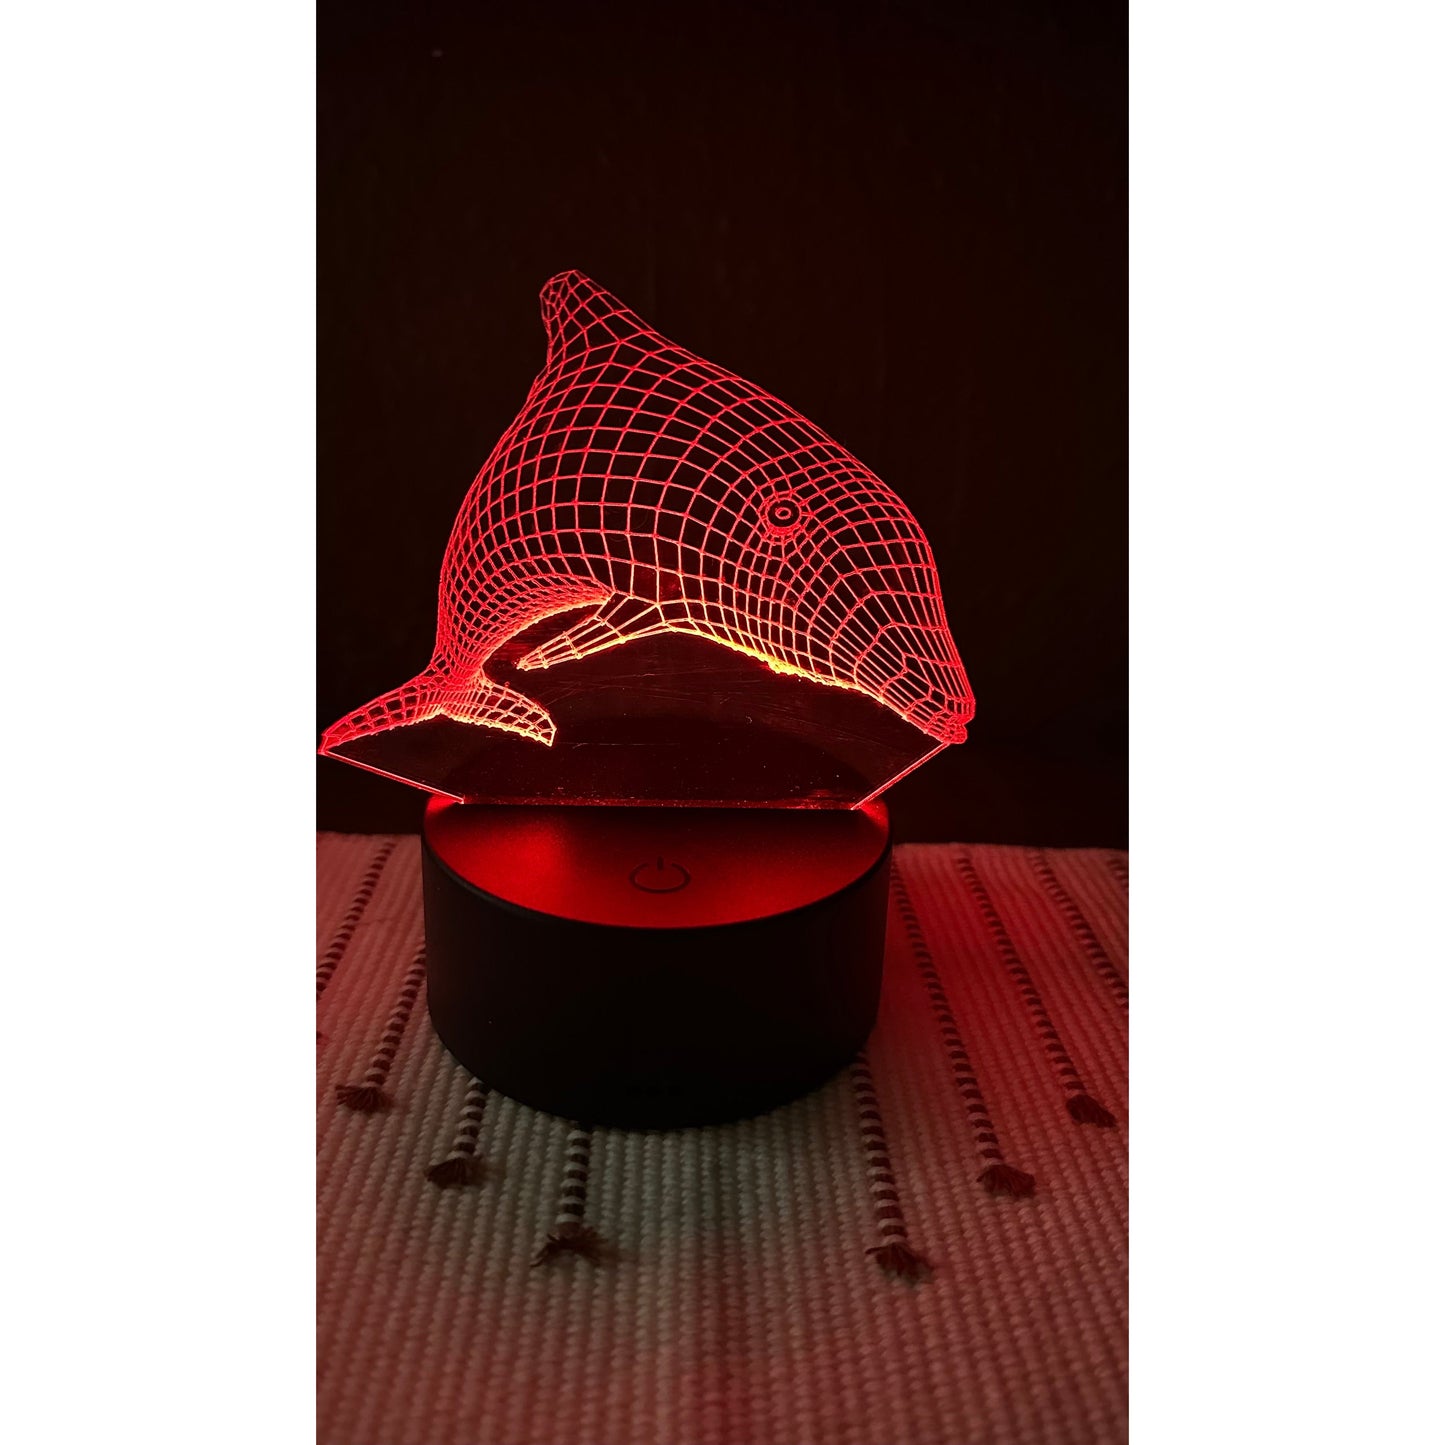 Dolphin Engraved in Acrylic with LED Light Base